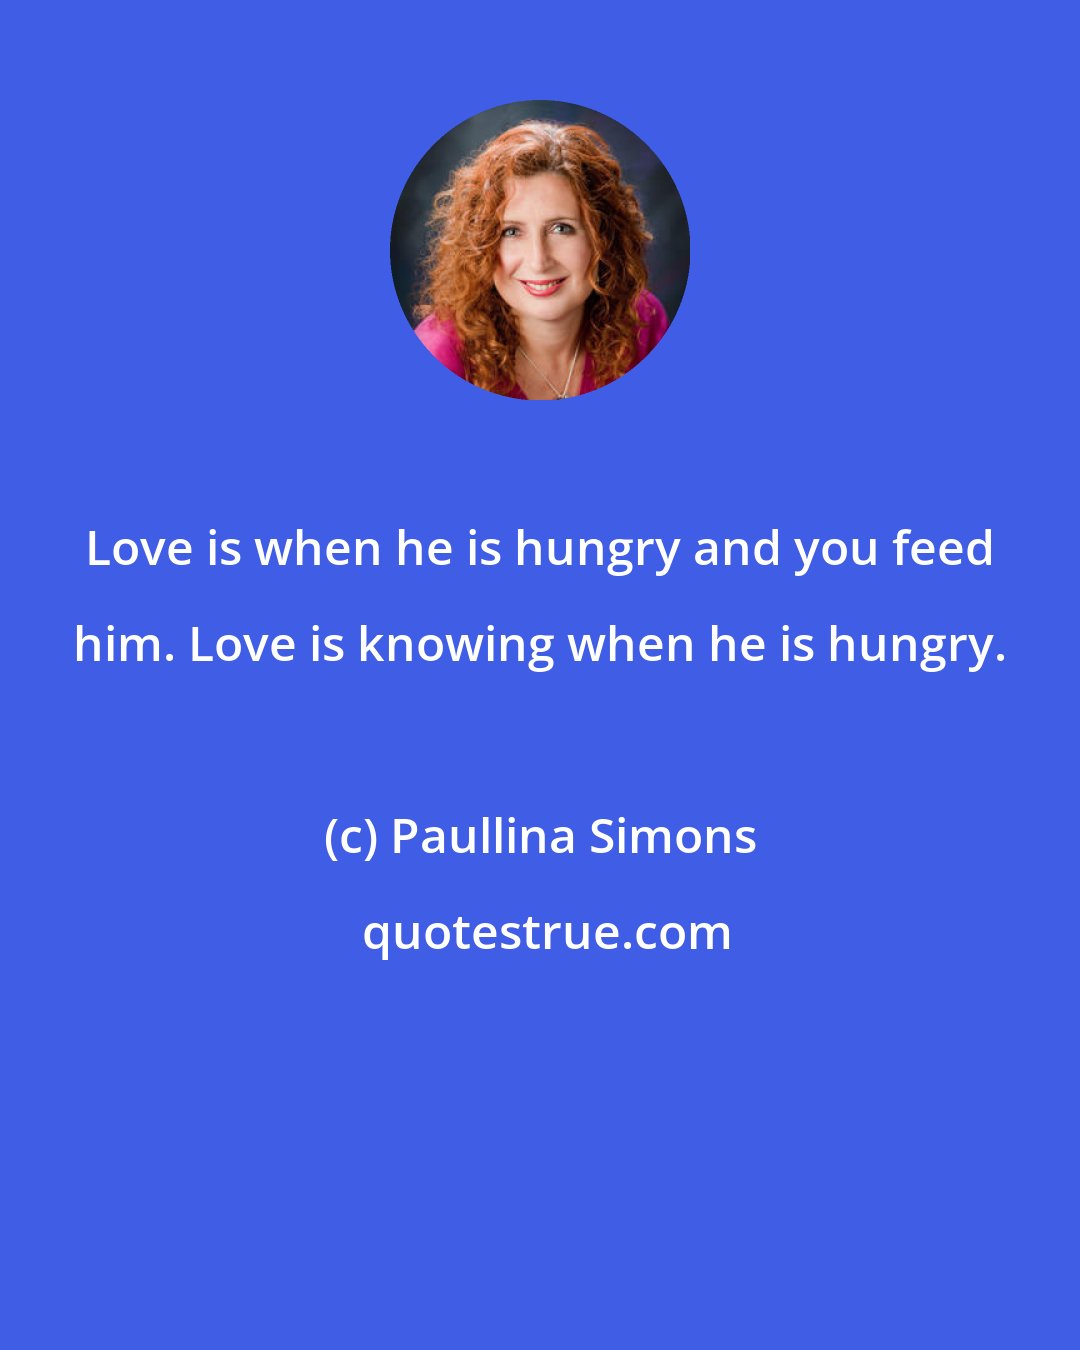 Paullina Simons: Love is when he is hungry and you feed him. Love is knowing when he is hungry.